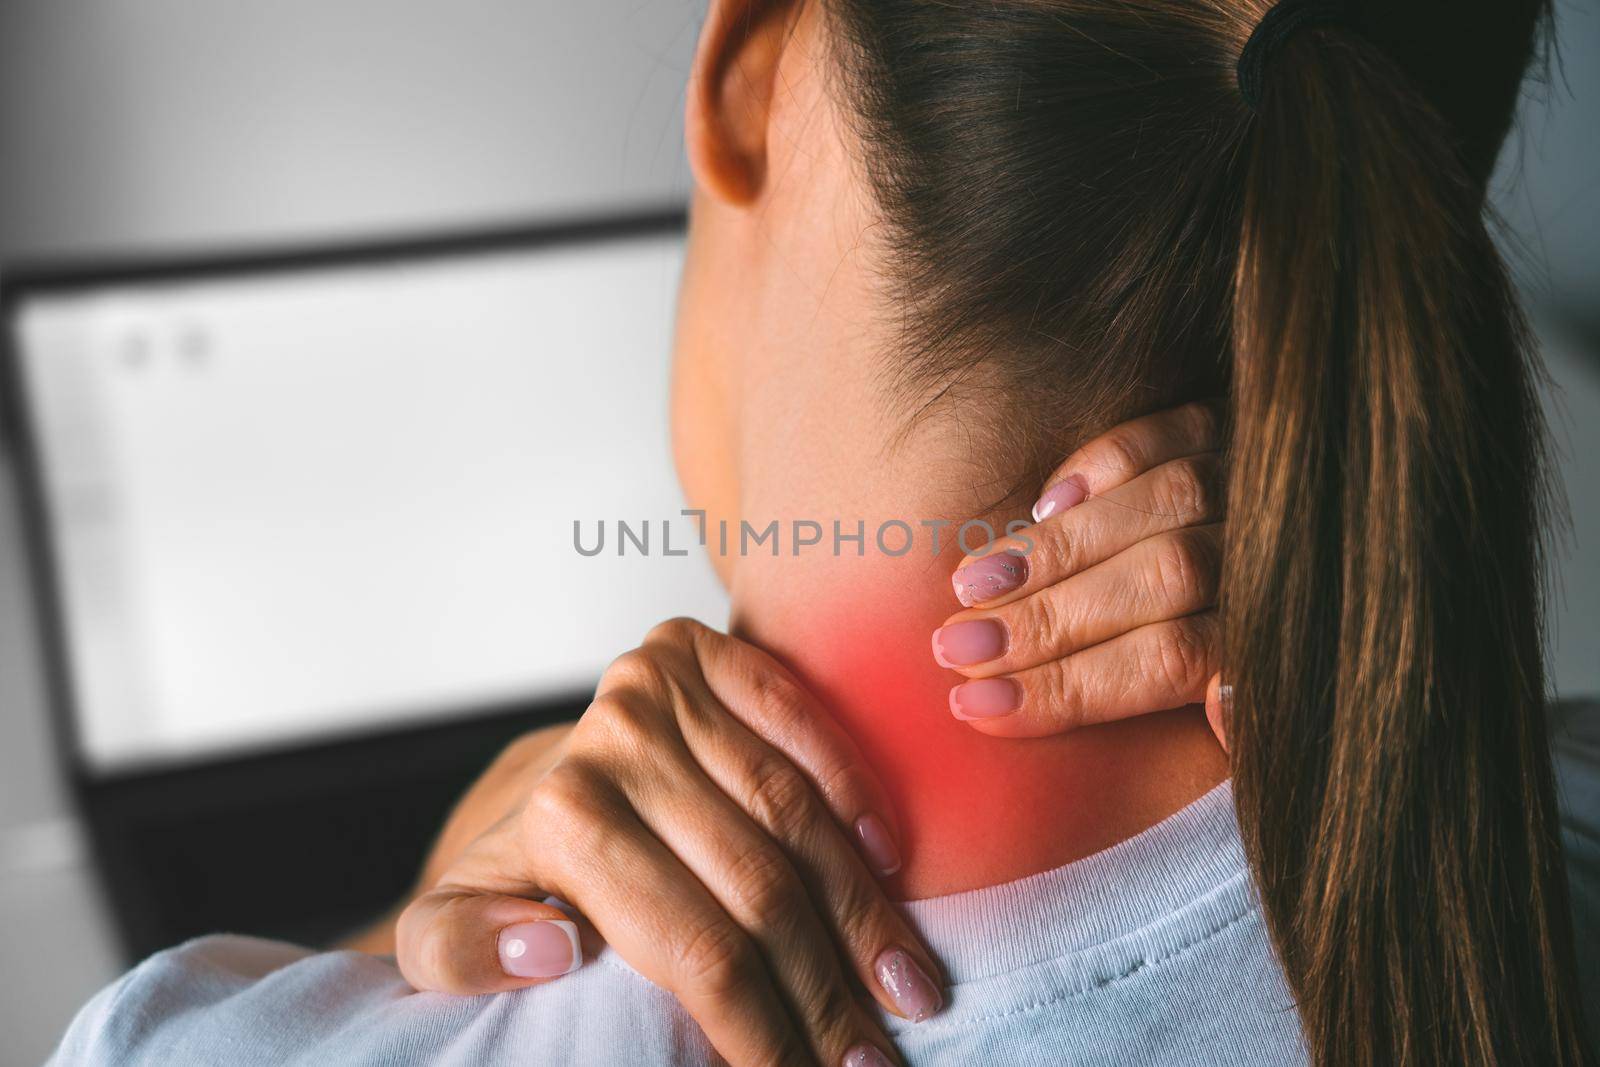 Neck pain after working on computer. Young woman massaging neck to relieve pain after working on pc by DariaKulkova